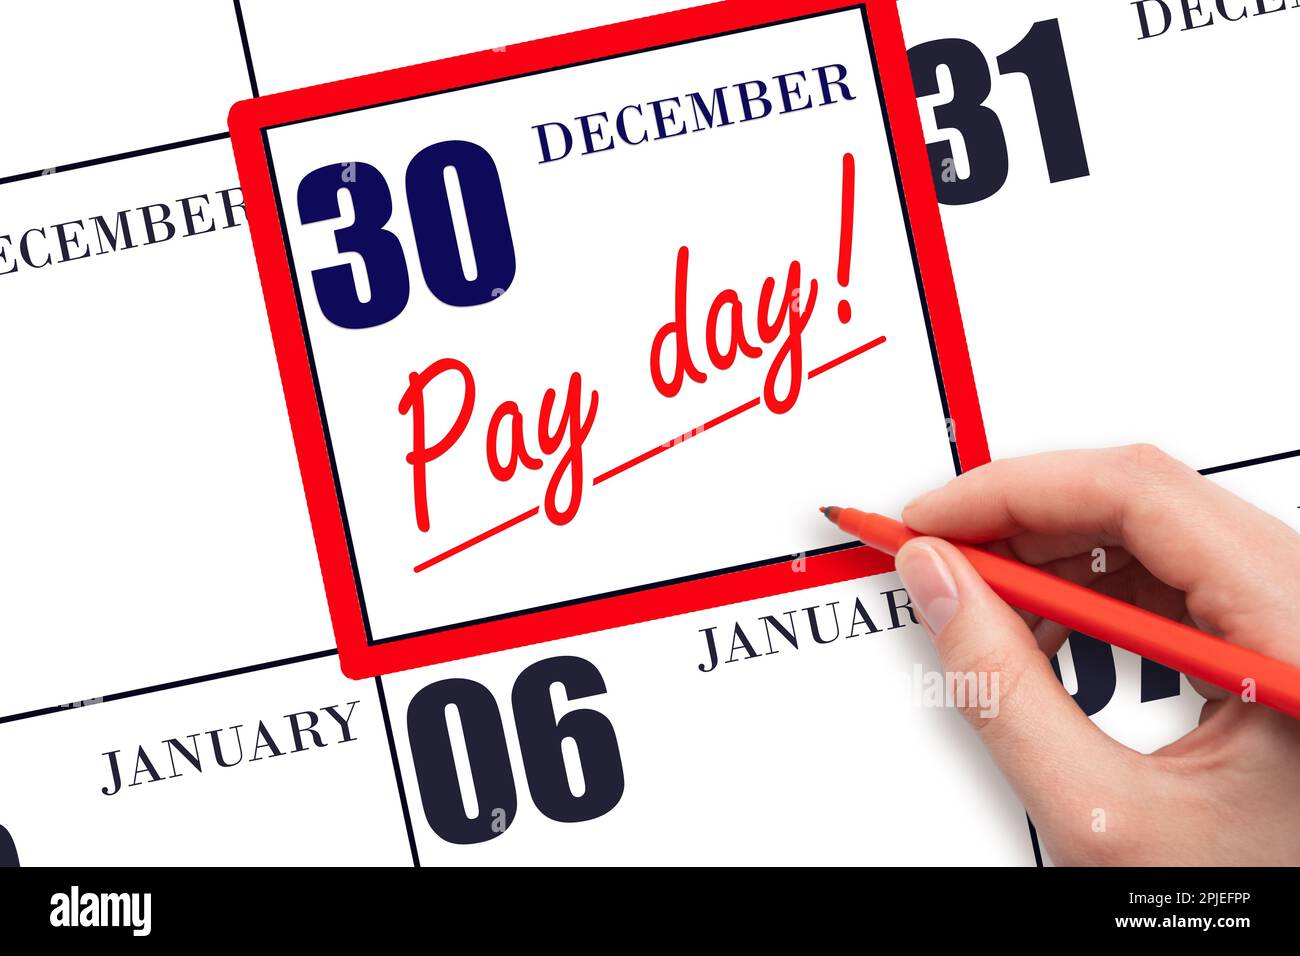 30th day of December. Hand writing text PAY DATE on calendar date December 30 and underline it. Payment due date. Reminder concept of payment. Winter Stock Photo